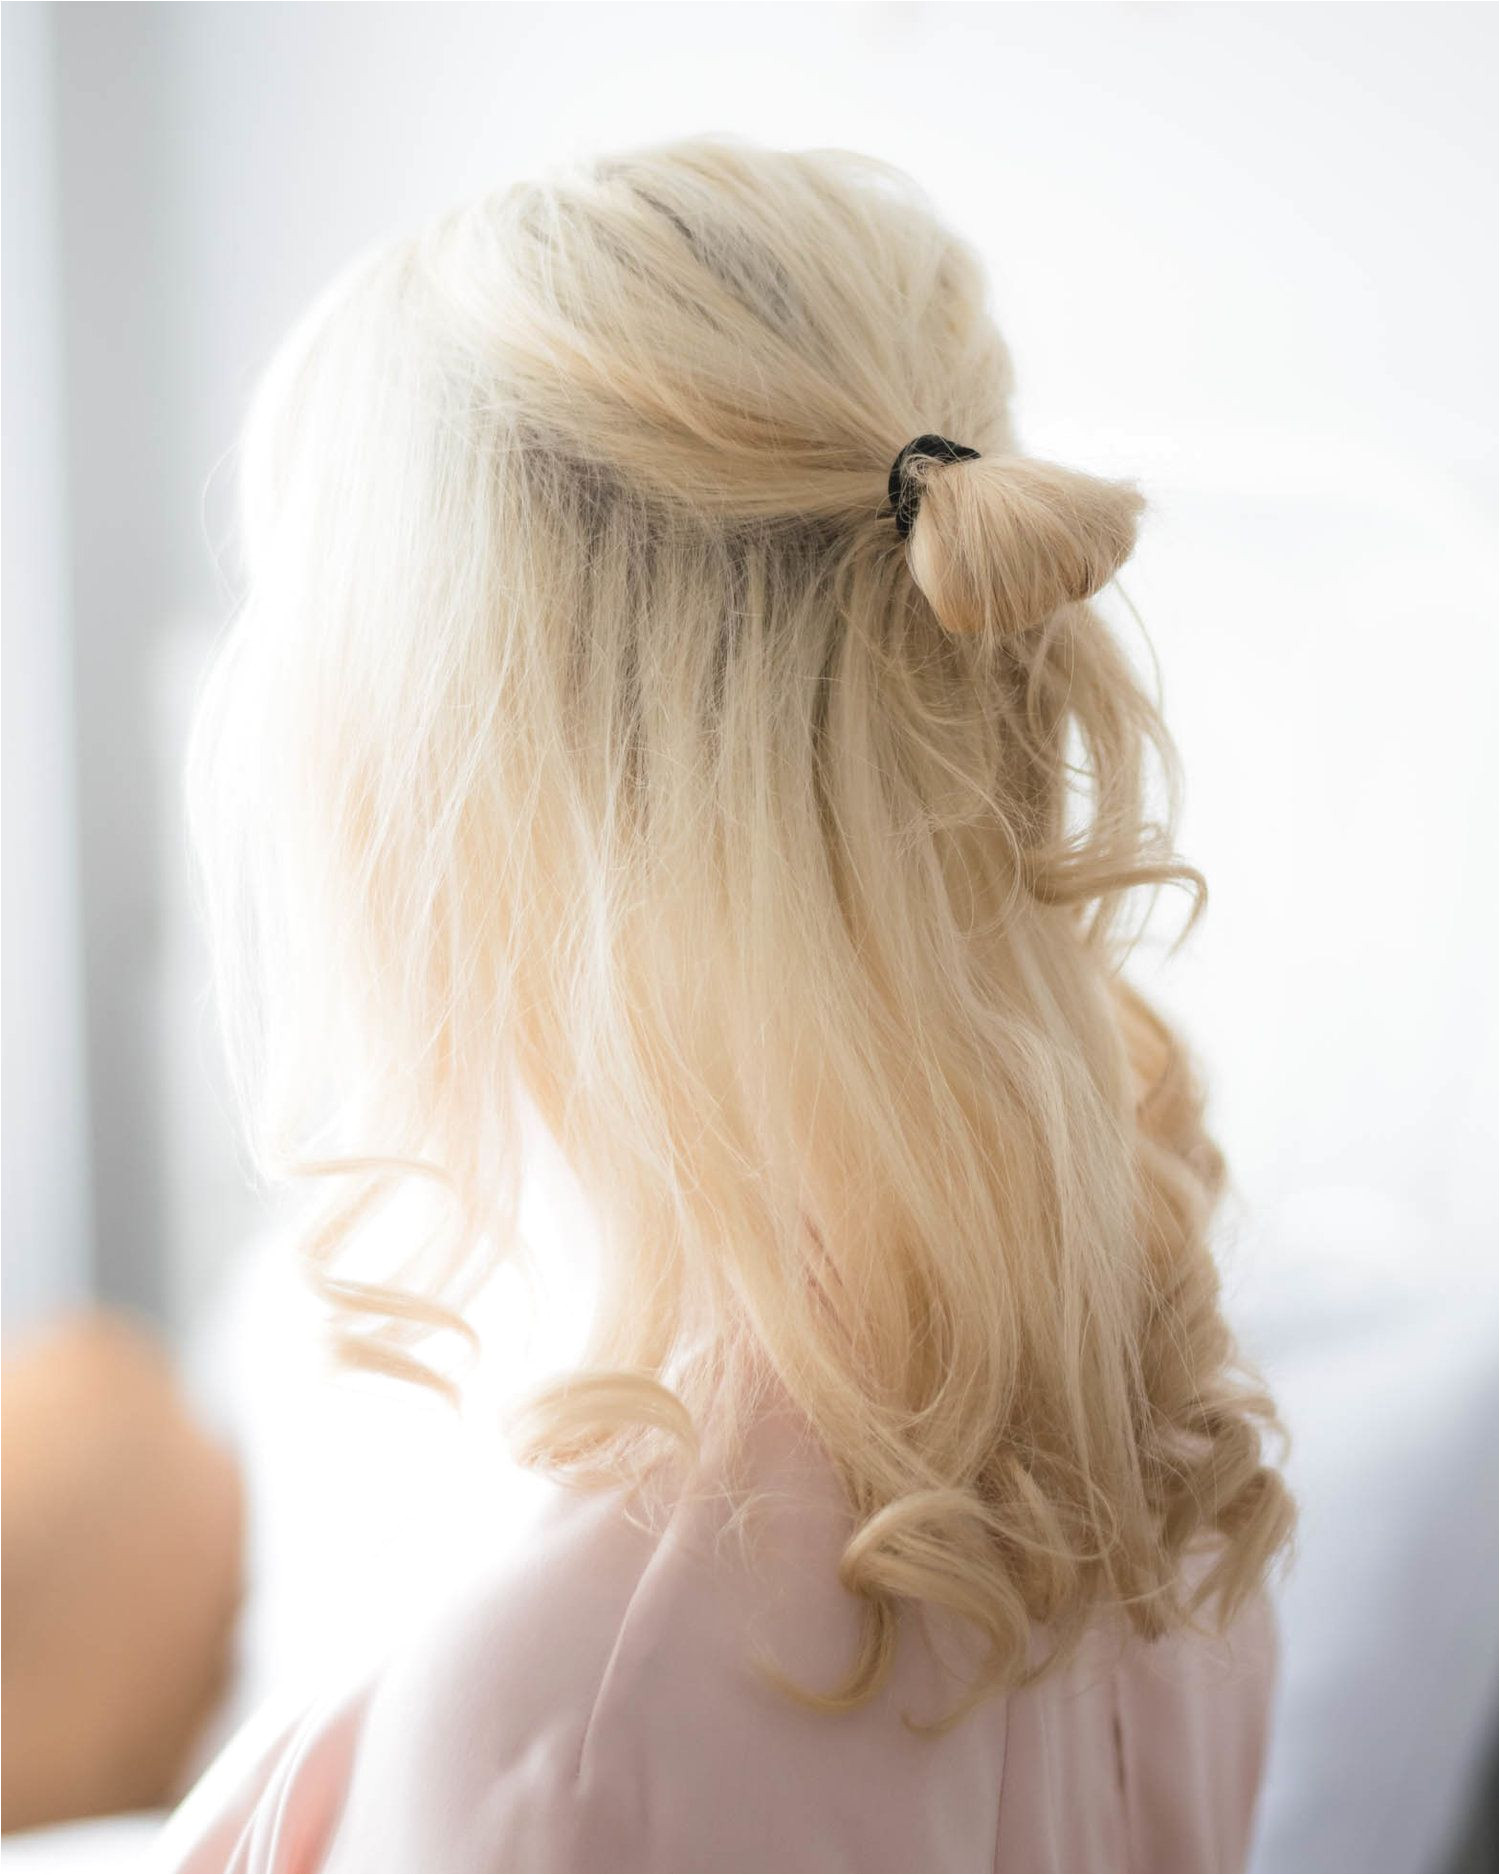 Save this pin and click through for more details 3 Easy Hairstyles You Can Do in Under 5 Minutes